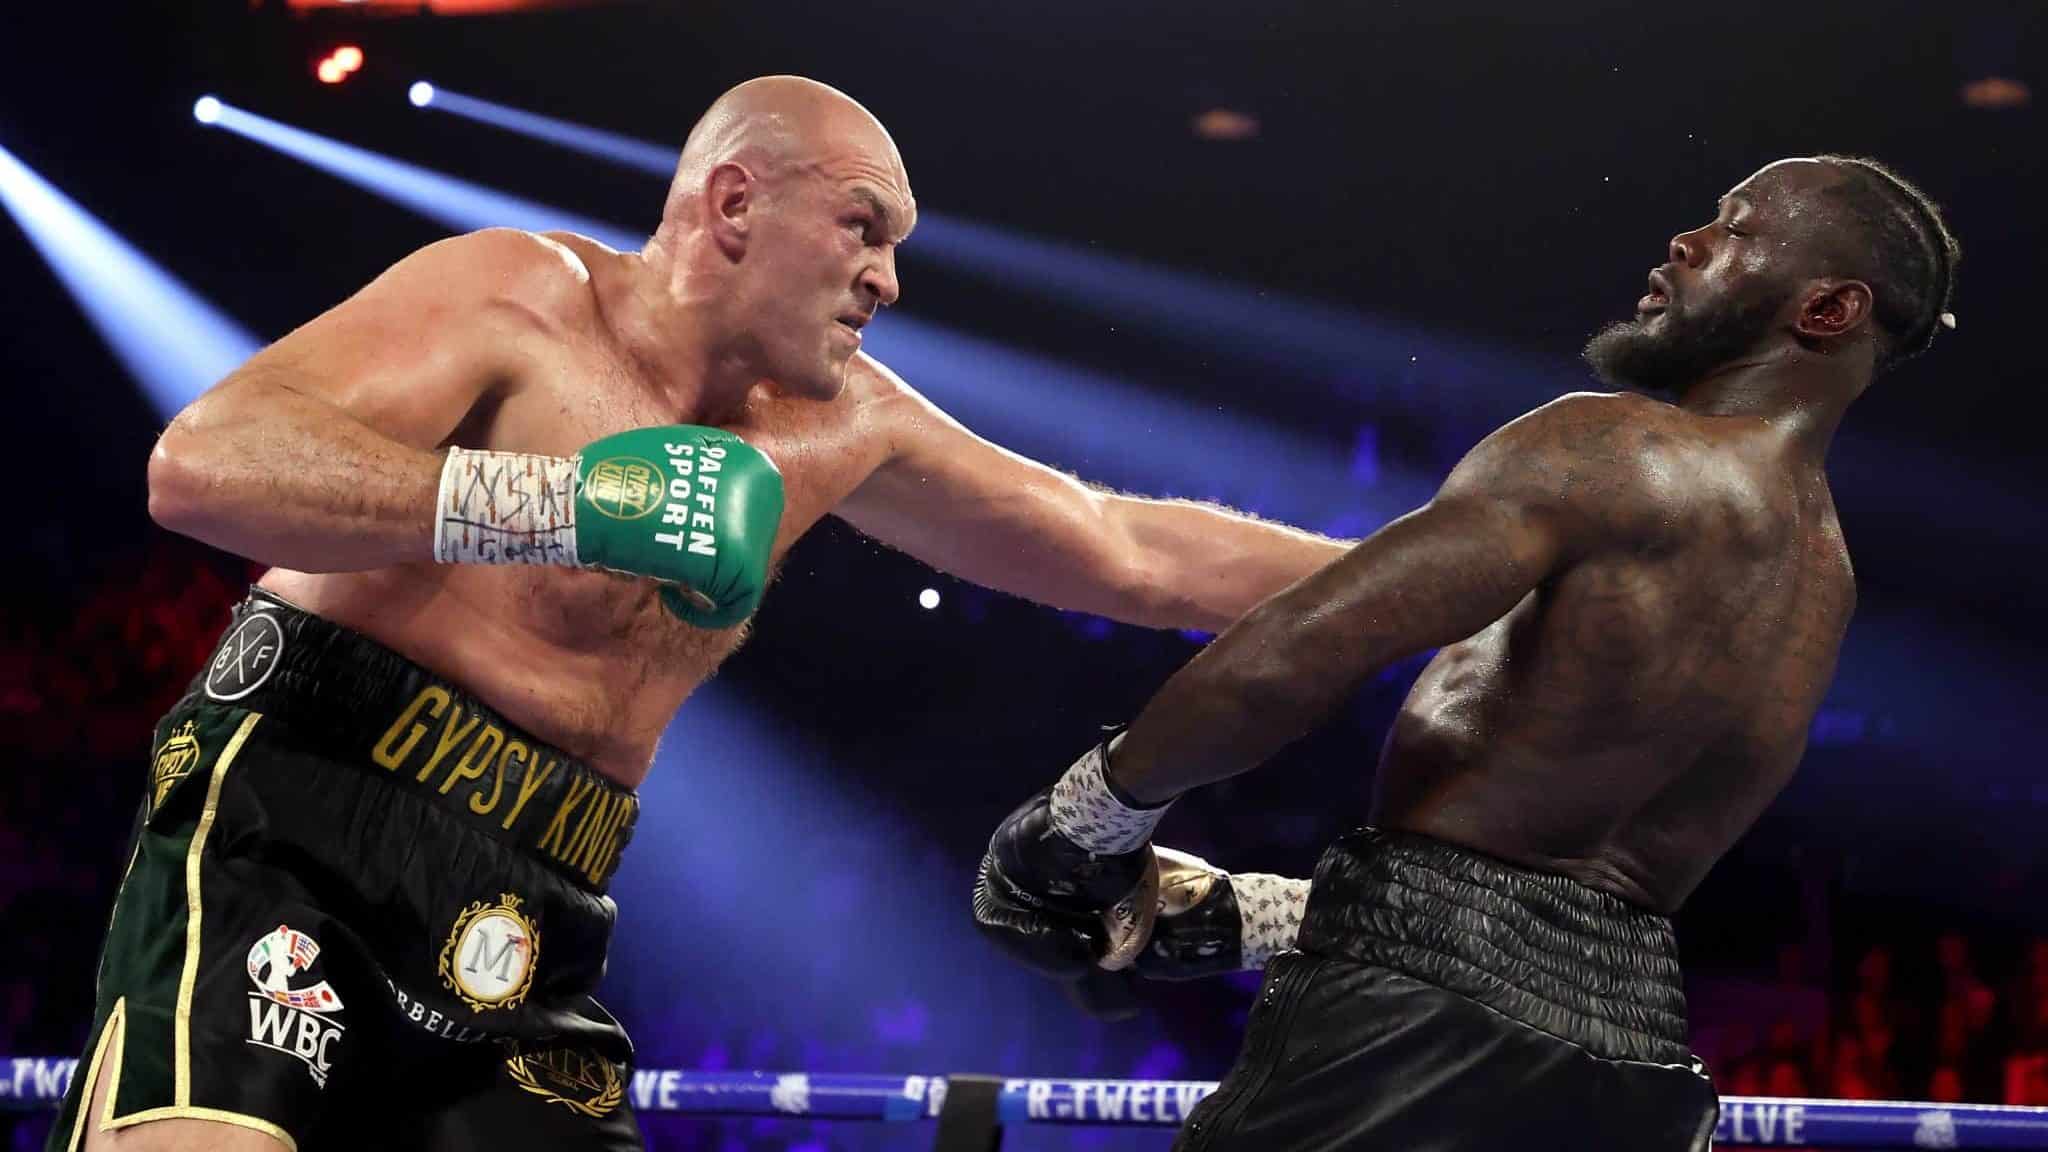 LAS VEGAS, NEVADA - FEBRUARY 22: Tyson Fury (L) punches Deontay Wilder during their Heavyweight bout for Wilder's WBC and Fury's lineal heavyweight title on February 22, 2020 at MGM Grand Garden Arena in Las Vegas, Nevada.